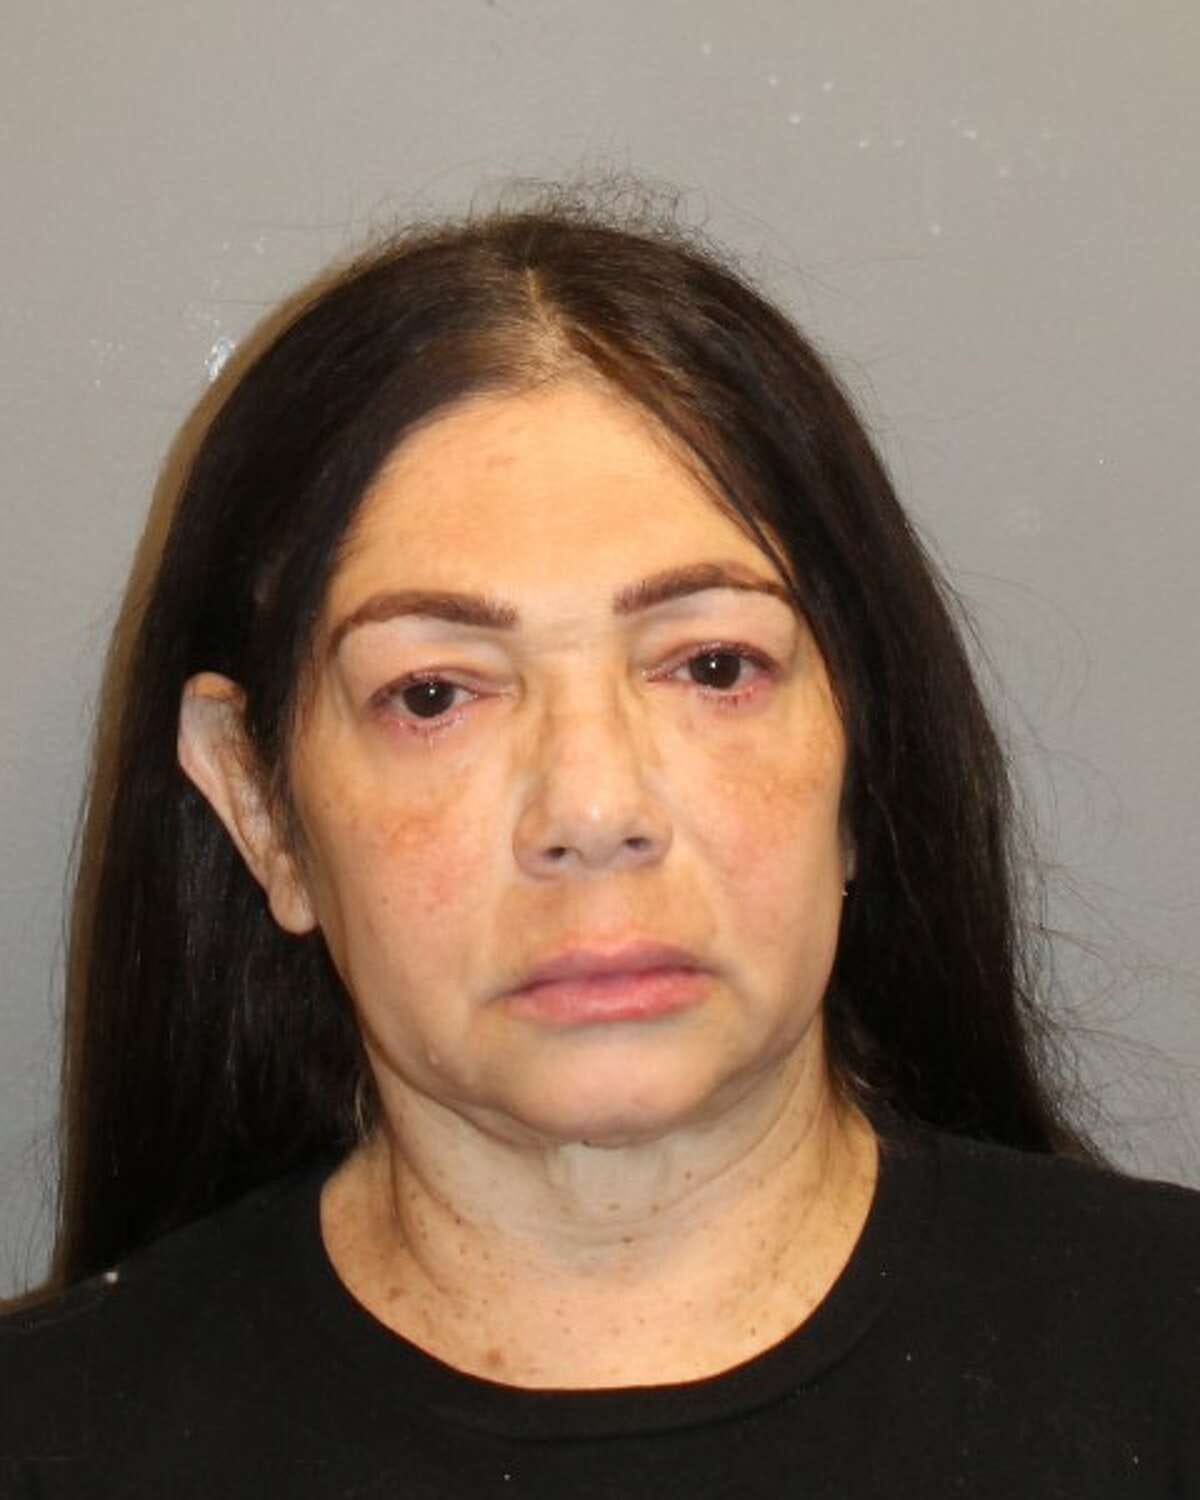 Stefanie Sanabria has resigned as a math coach at Brookside Elementary School in Norwalk after she was accused of using a chokehold on students, official says.